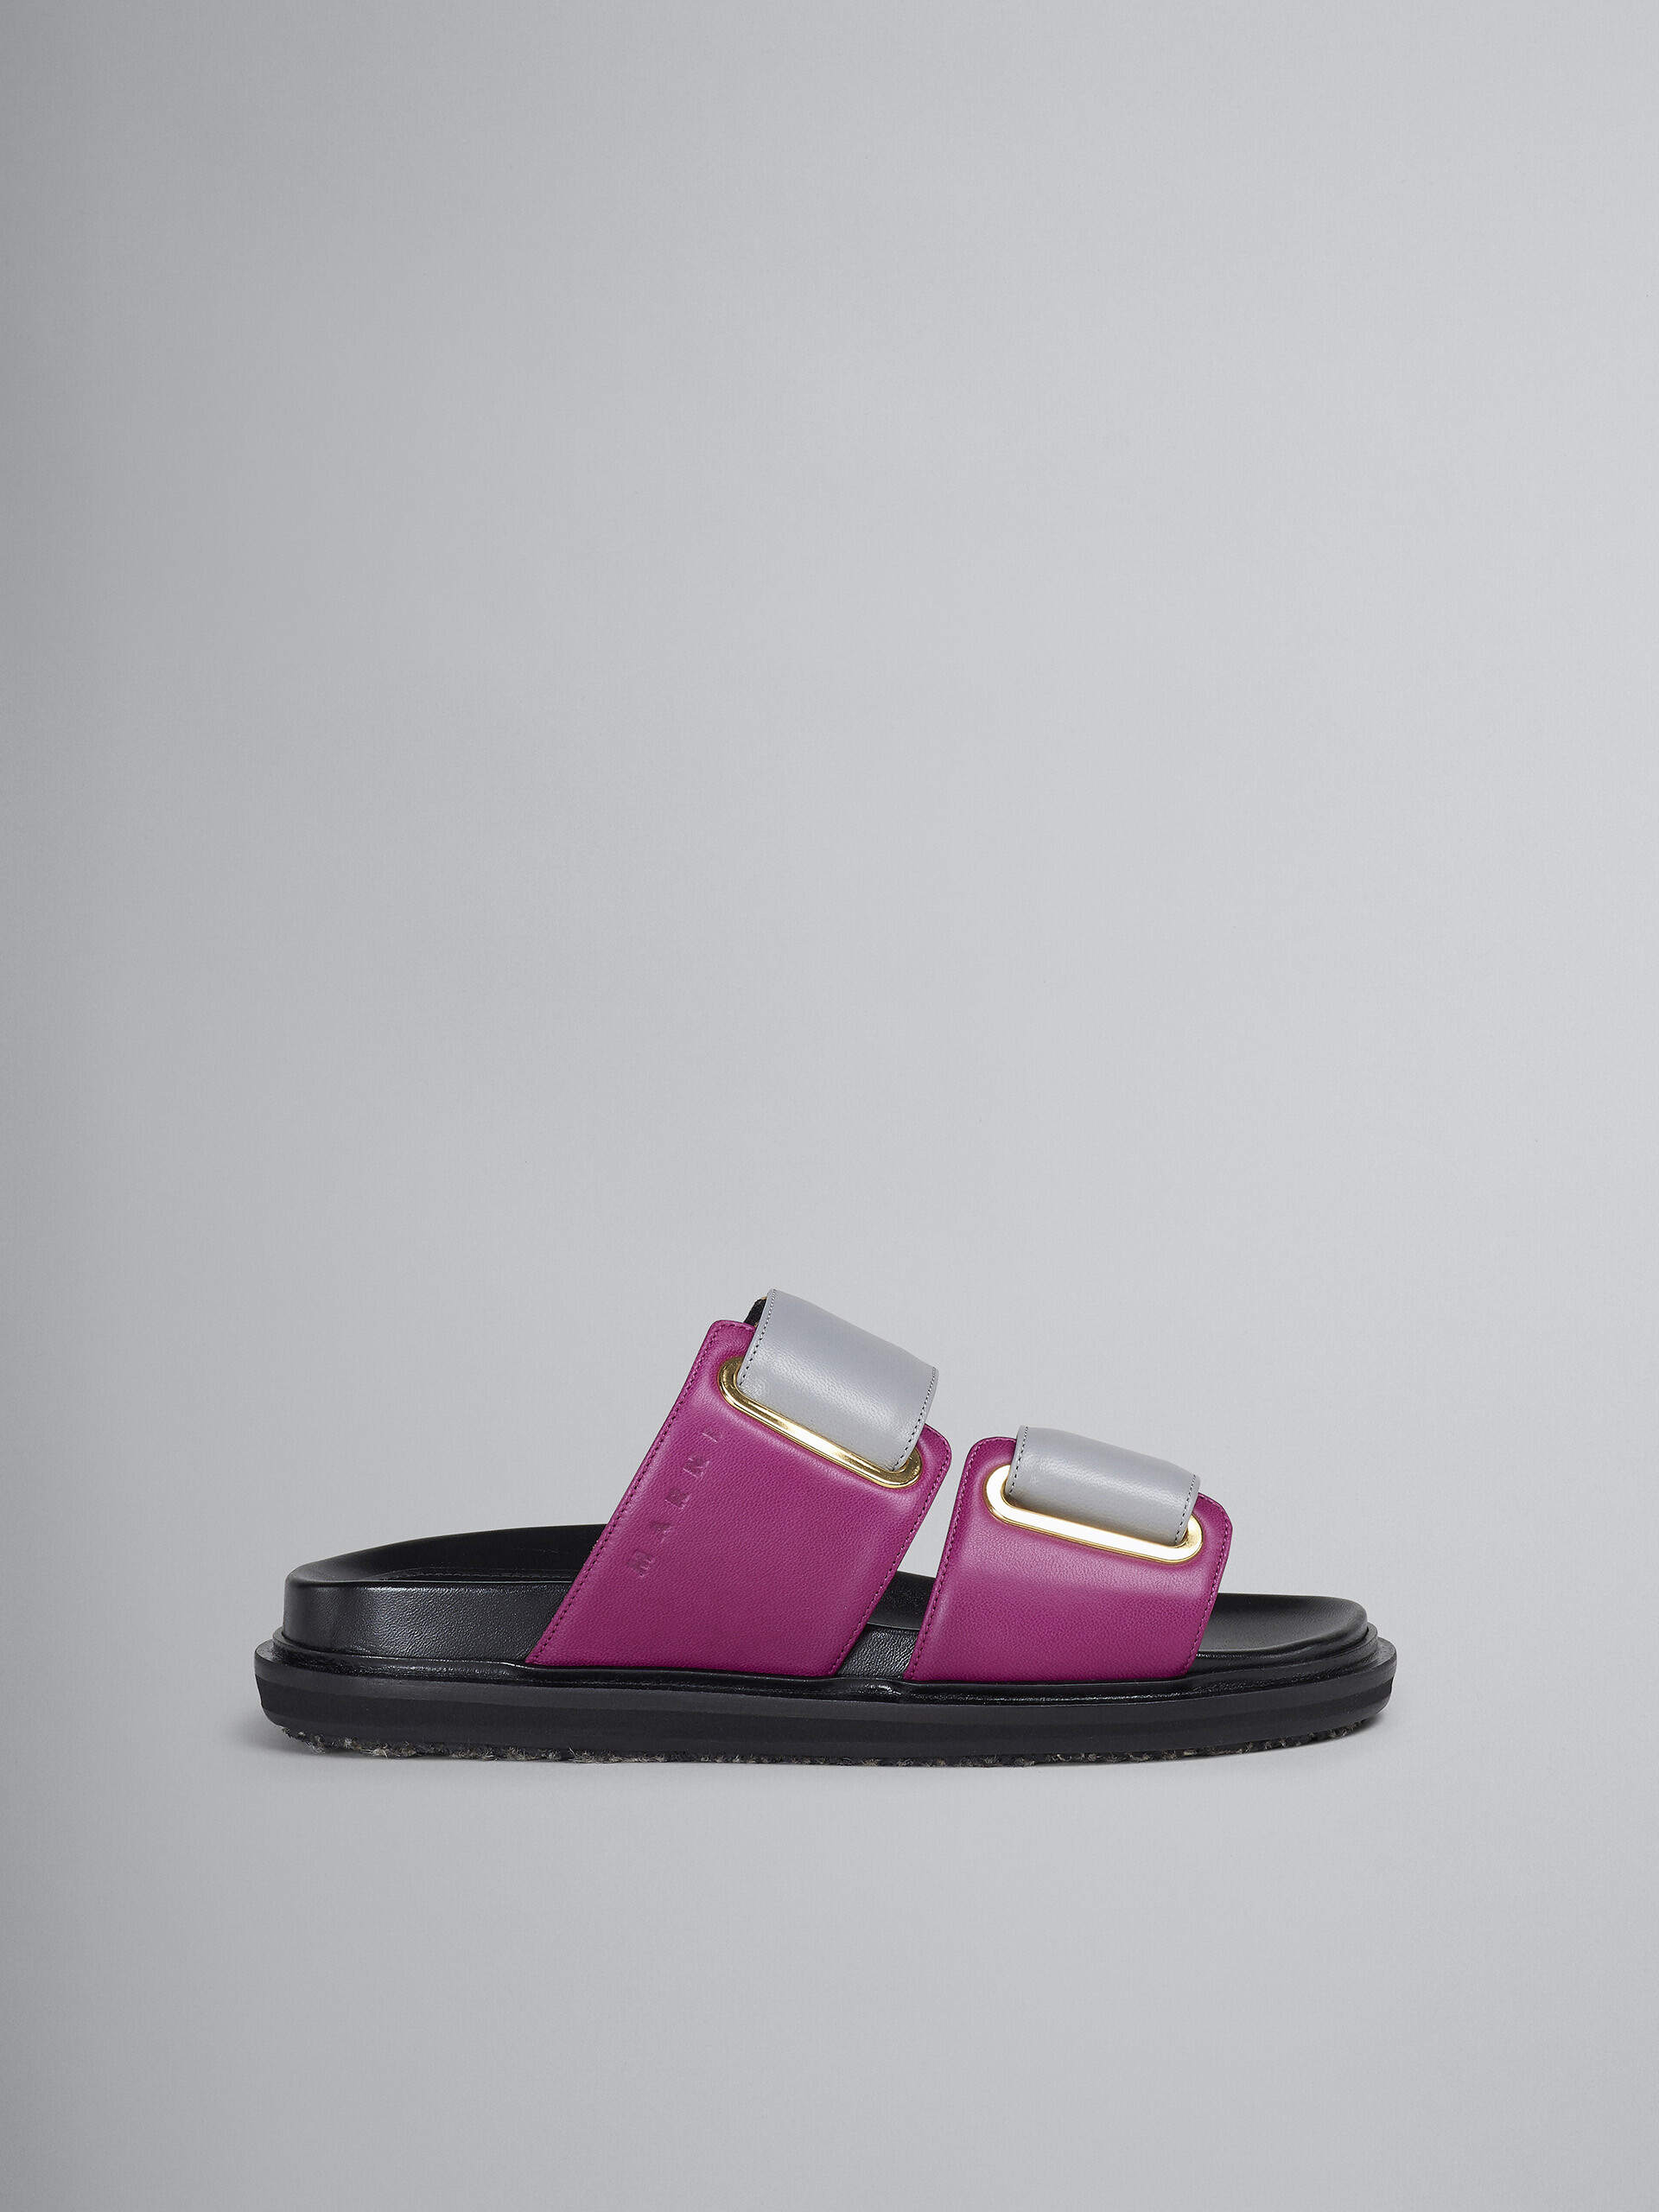 Grey and fucshia leather fussbett - Sandals - Image 1